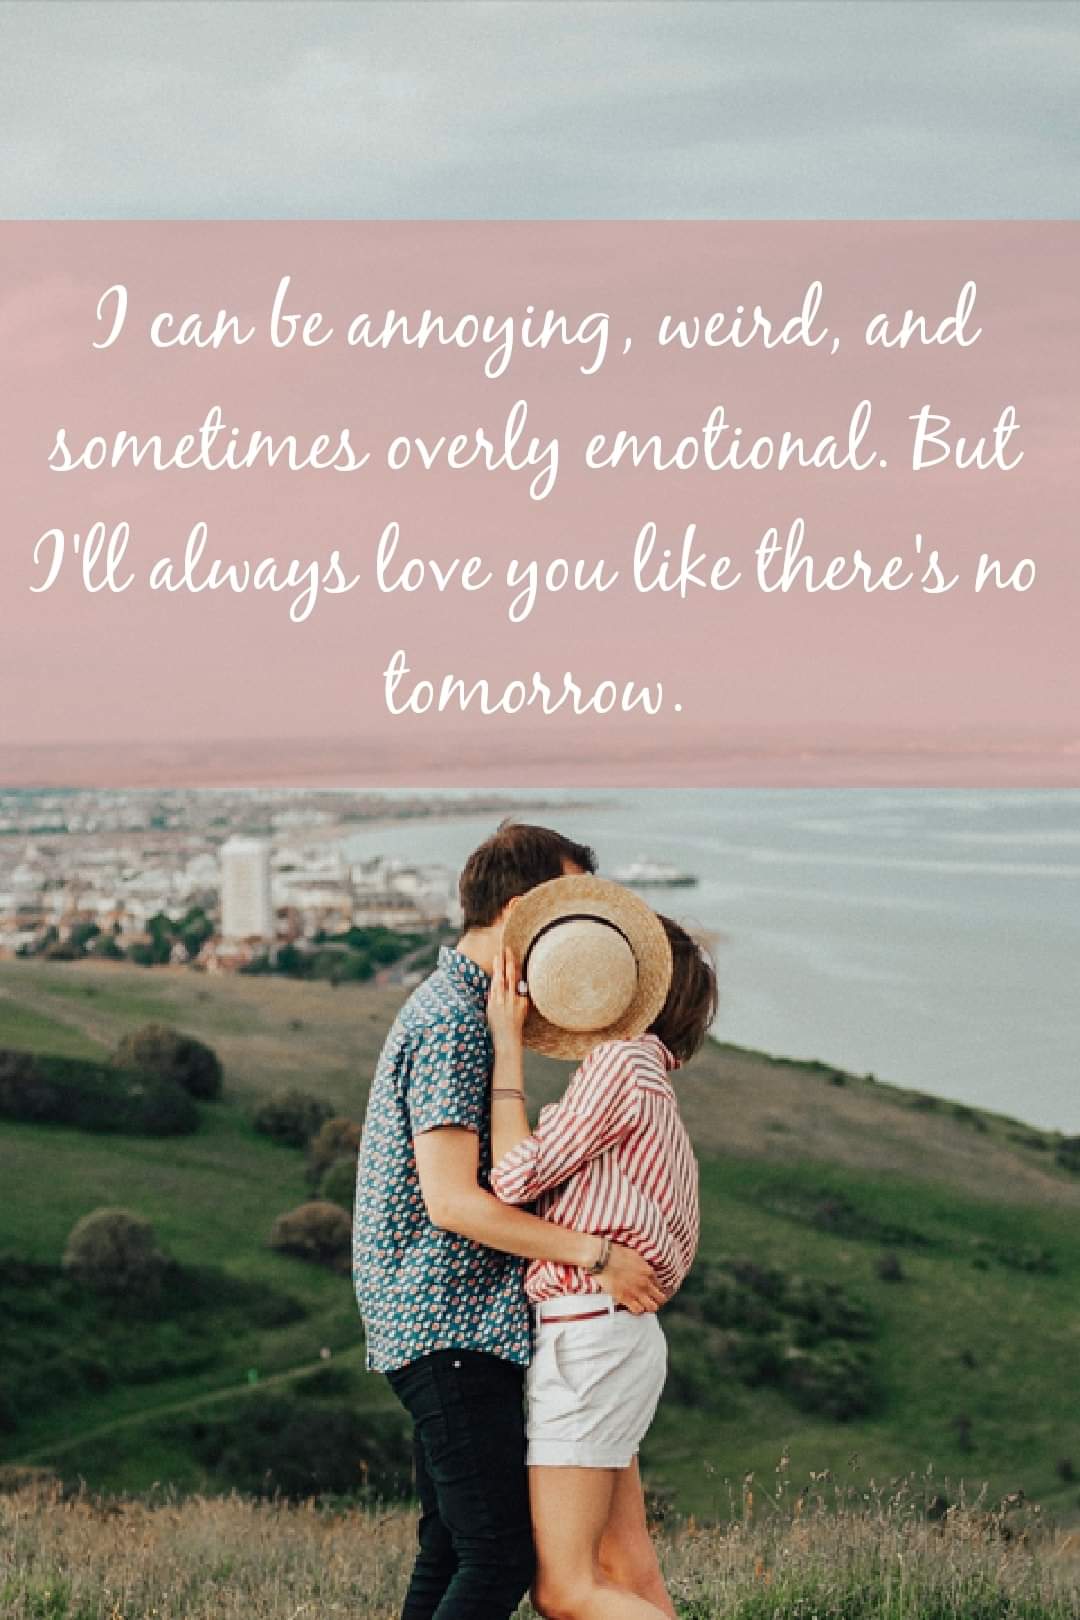 Best and Amazing  Love  Quotes  For Future Partners